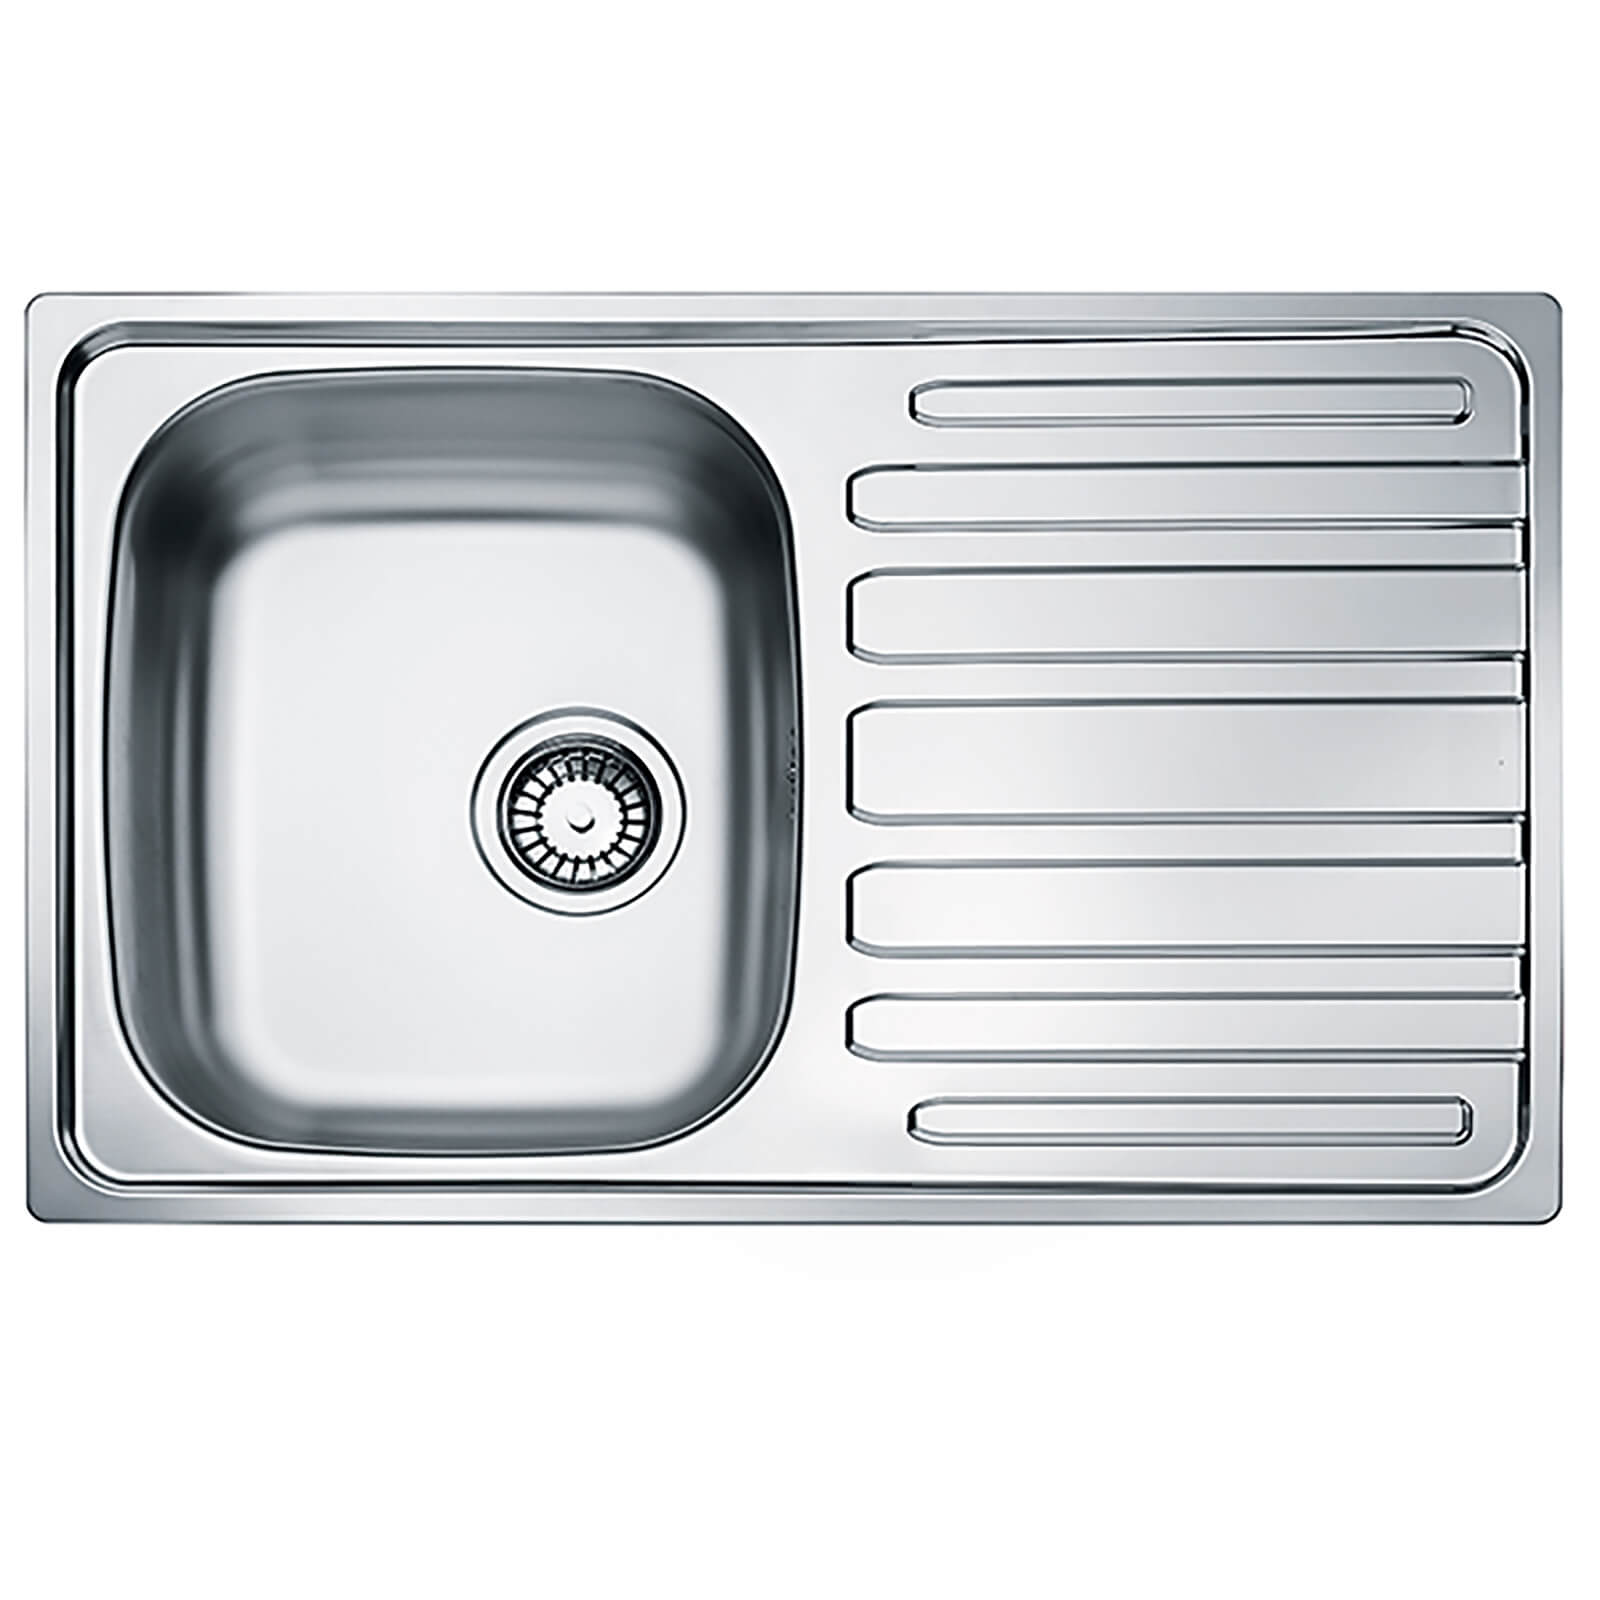 Compact 1 Bowl Sink